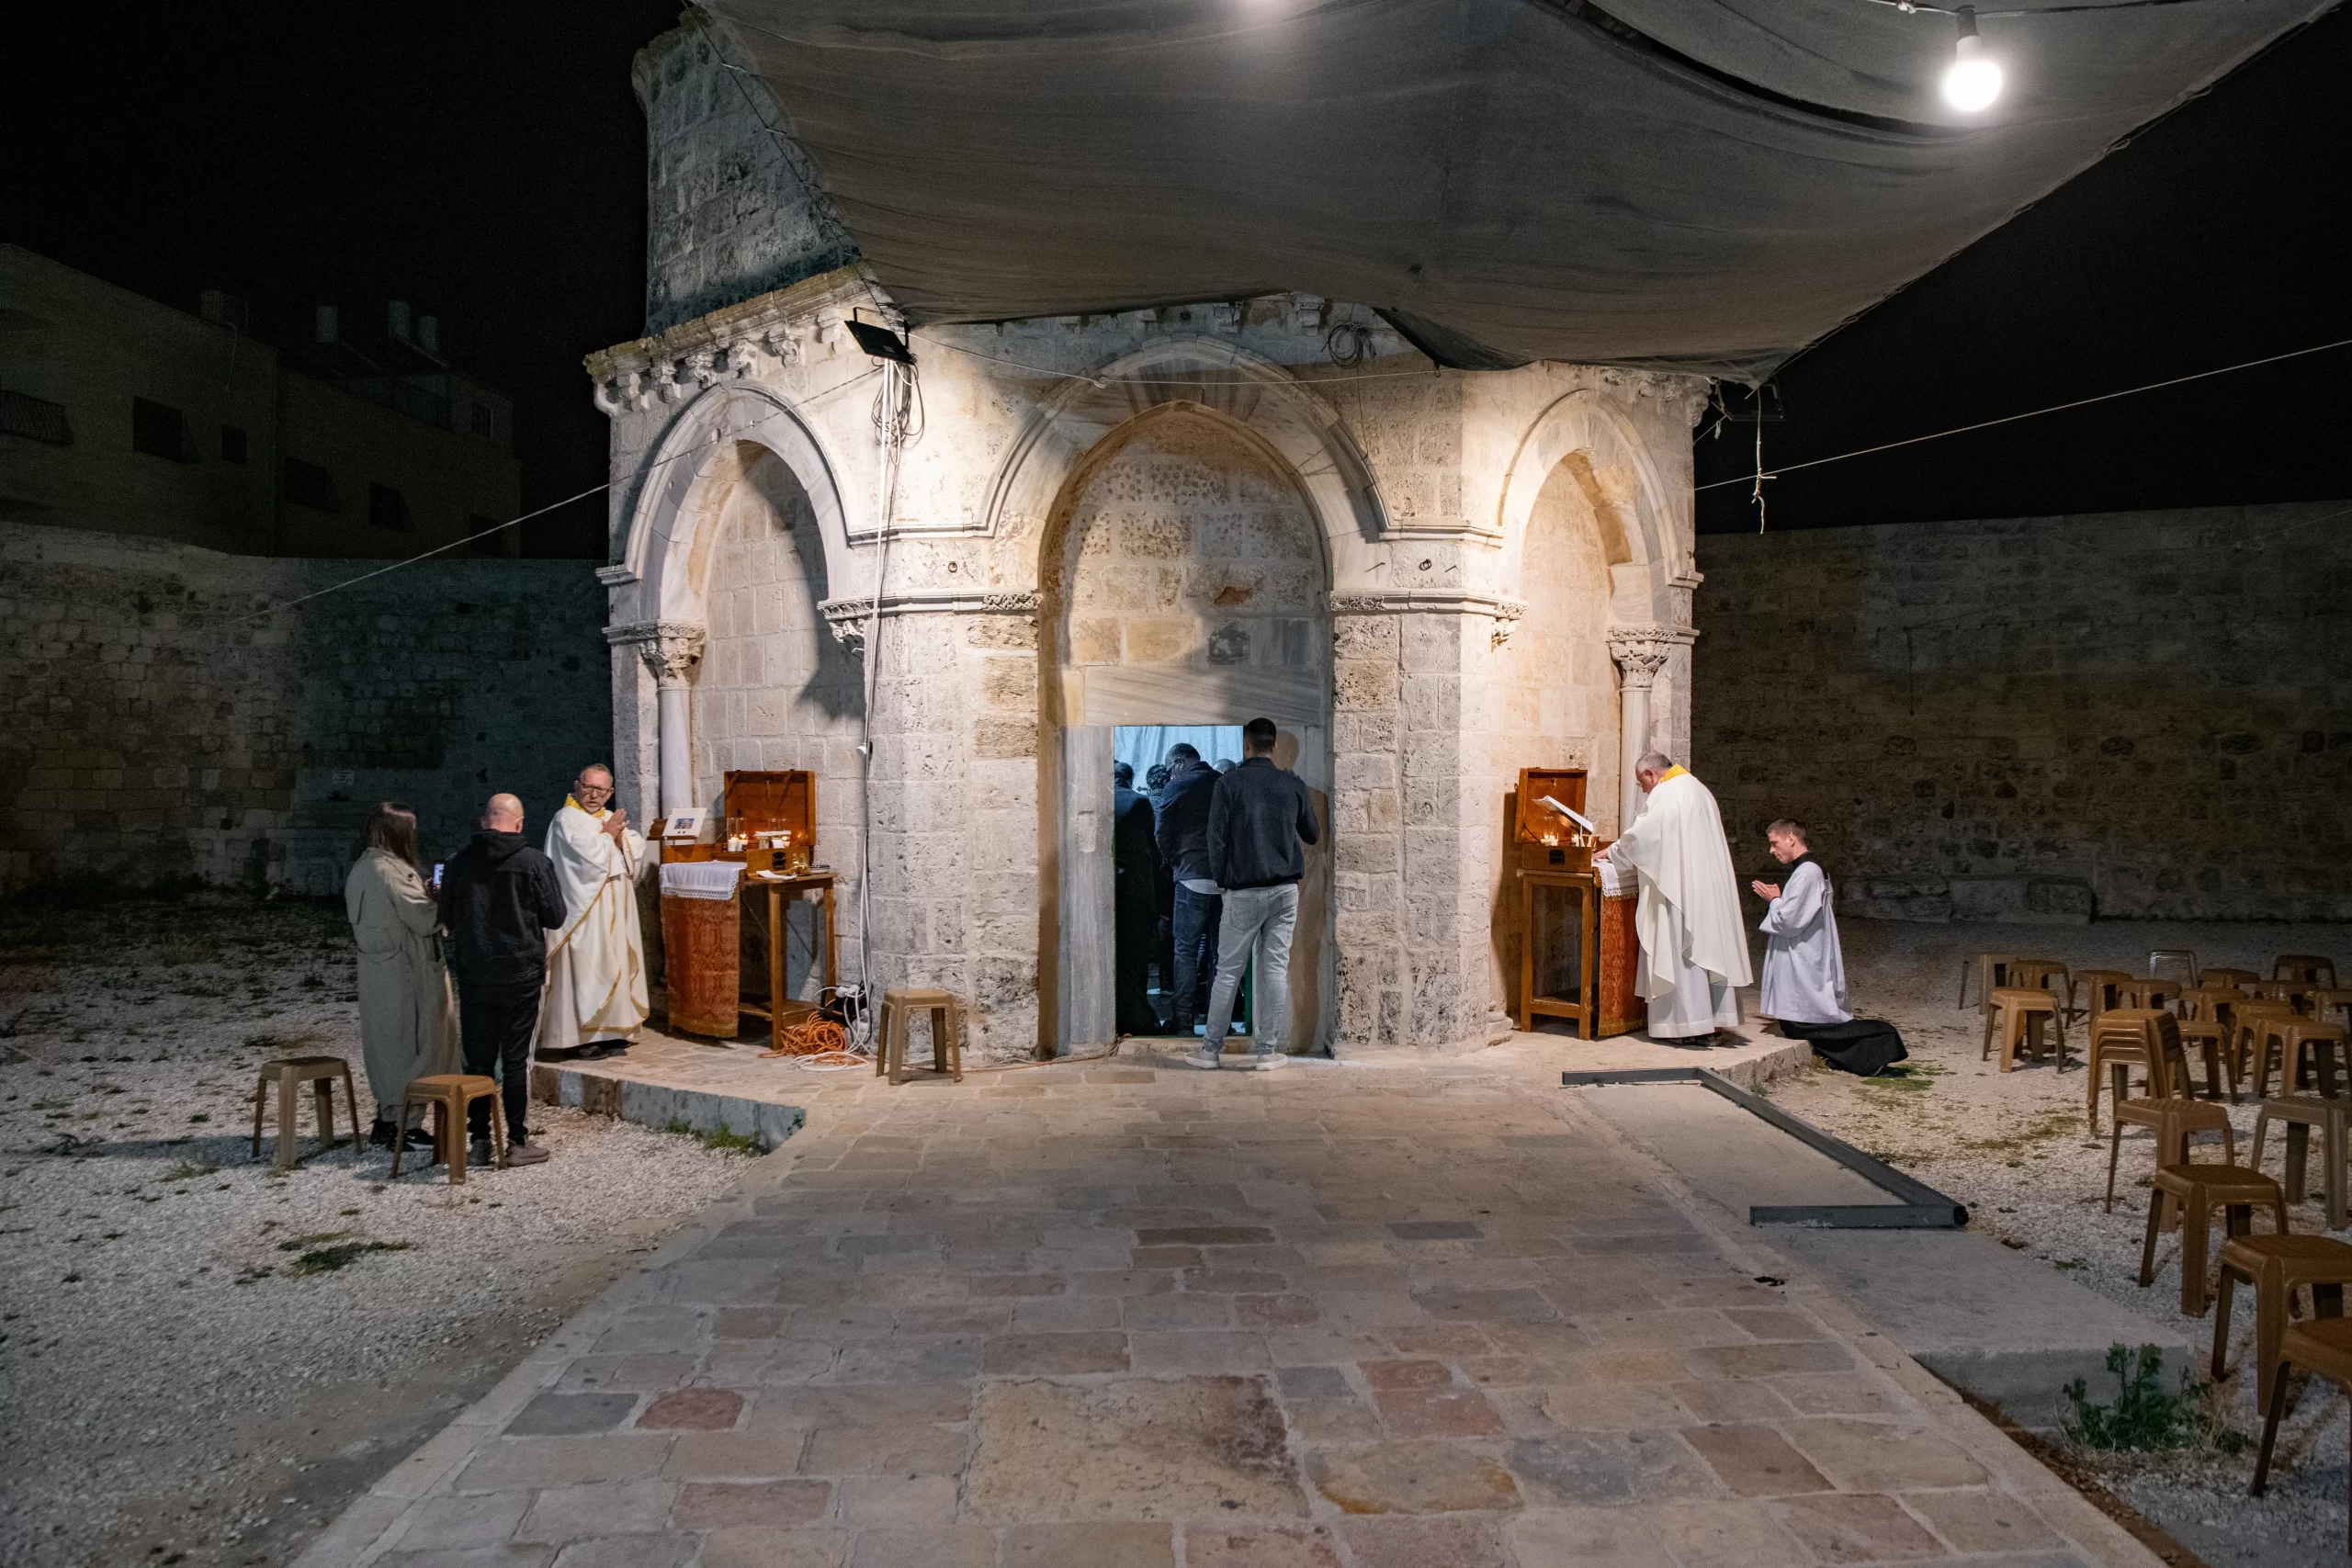 Three Masses were taking place simultaneously in the area of the Chapel of the Ascension on the Mount of Olives in Jerusalem during the night of May 8-9, 2024, for the solemnity. Besides inside the chapel, it's also possible to celebrate at two portable altars placed outside. Credit: Marinella Bandini